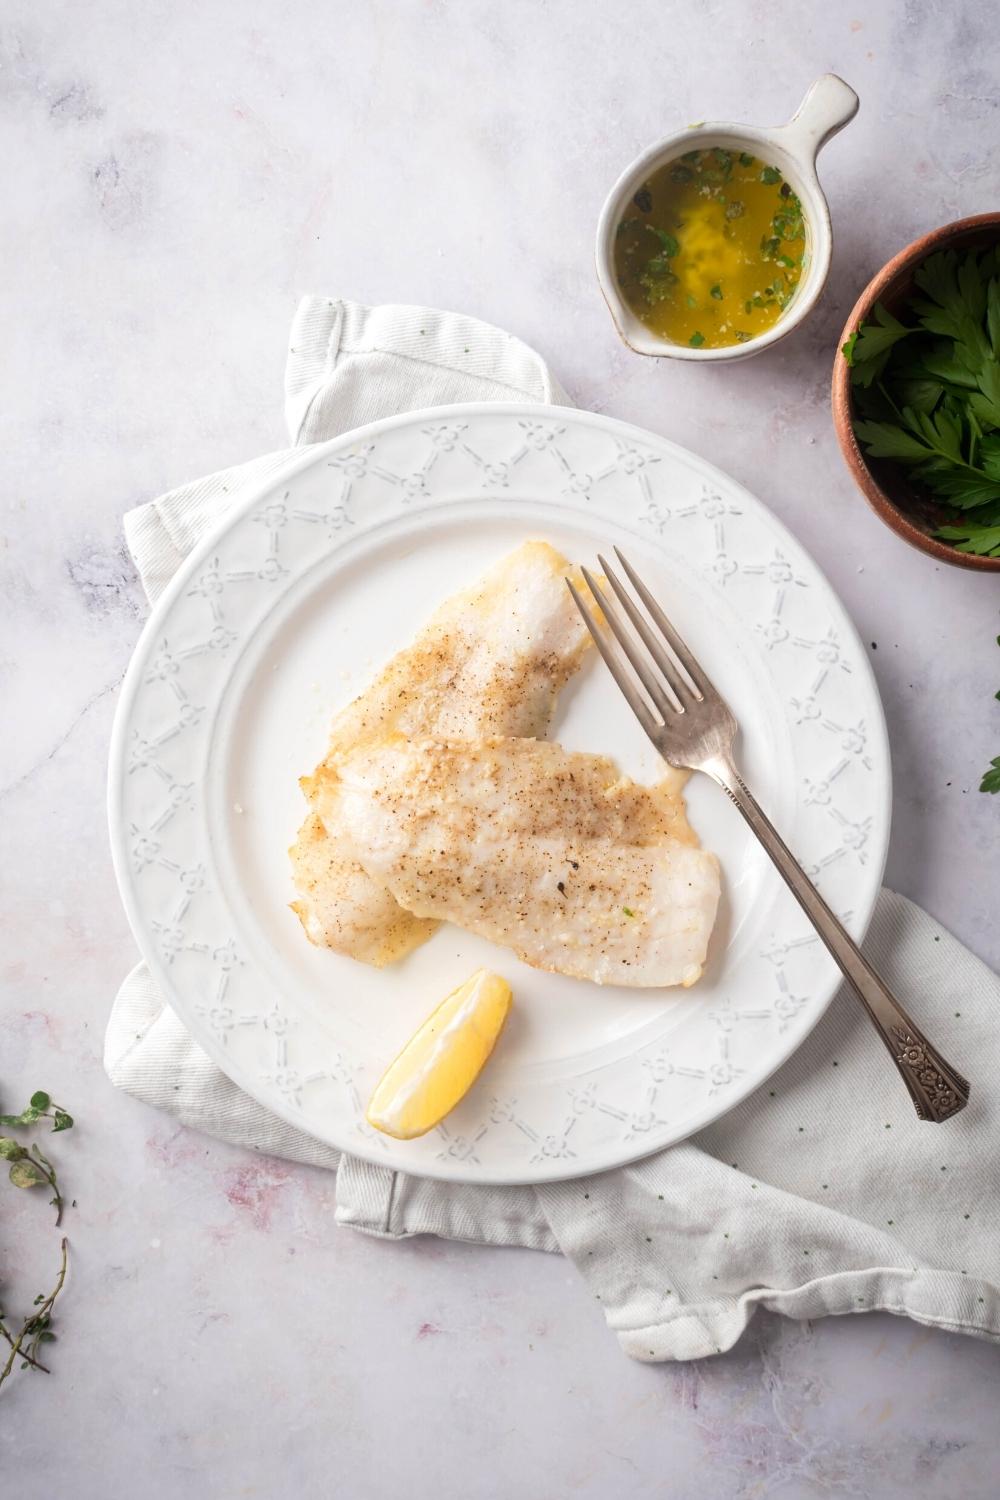 Two mahi mahi fillets, a fork, and a lemon wedge on top of a white plate on a white tablecloth on a grey counter. Behind it is a small white cup filled with garlic butter.